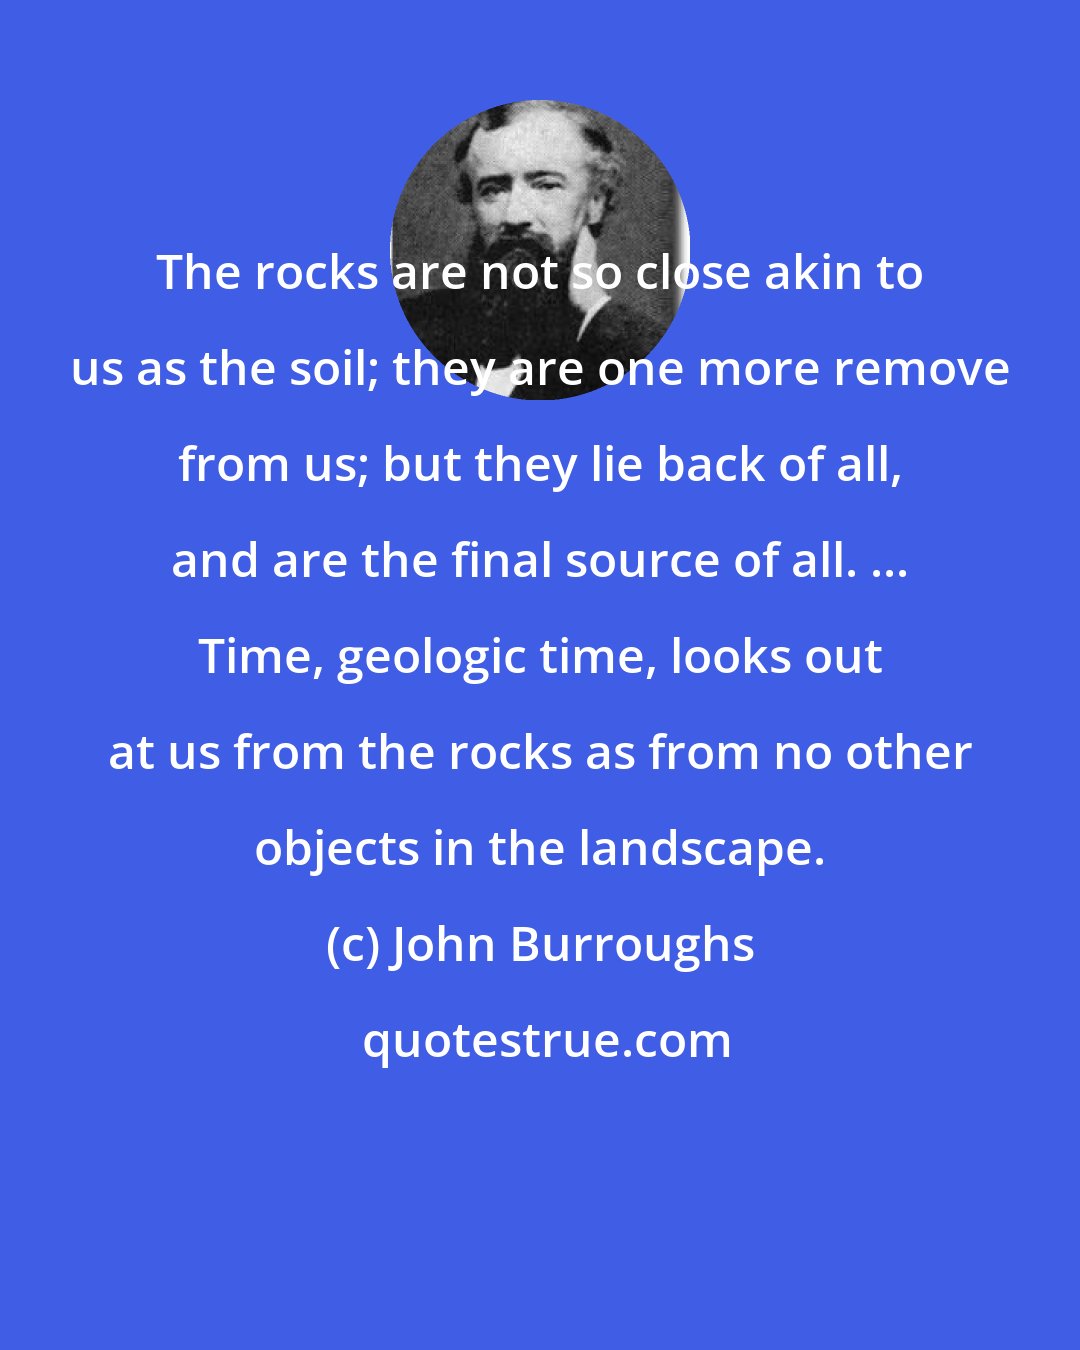 John Burroughs: The rocks are not so close akin to us as the soil; they are one more remove from us; but they lie back of all, and are the final source of all. ... Time, geologic time, looks out at us from the rocks as from no other objects in the landscape.